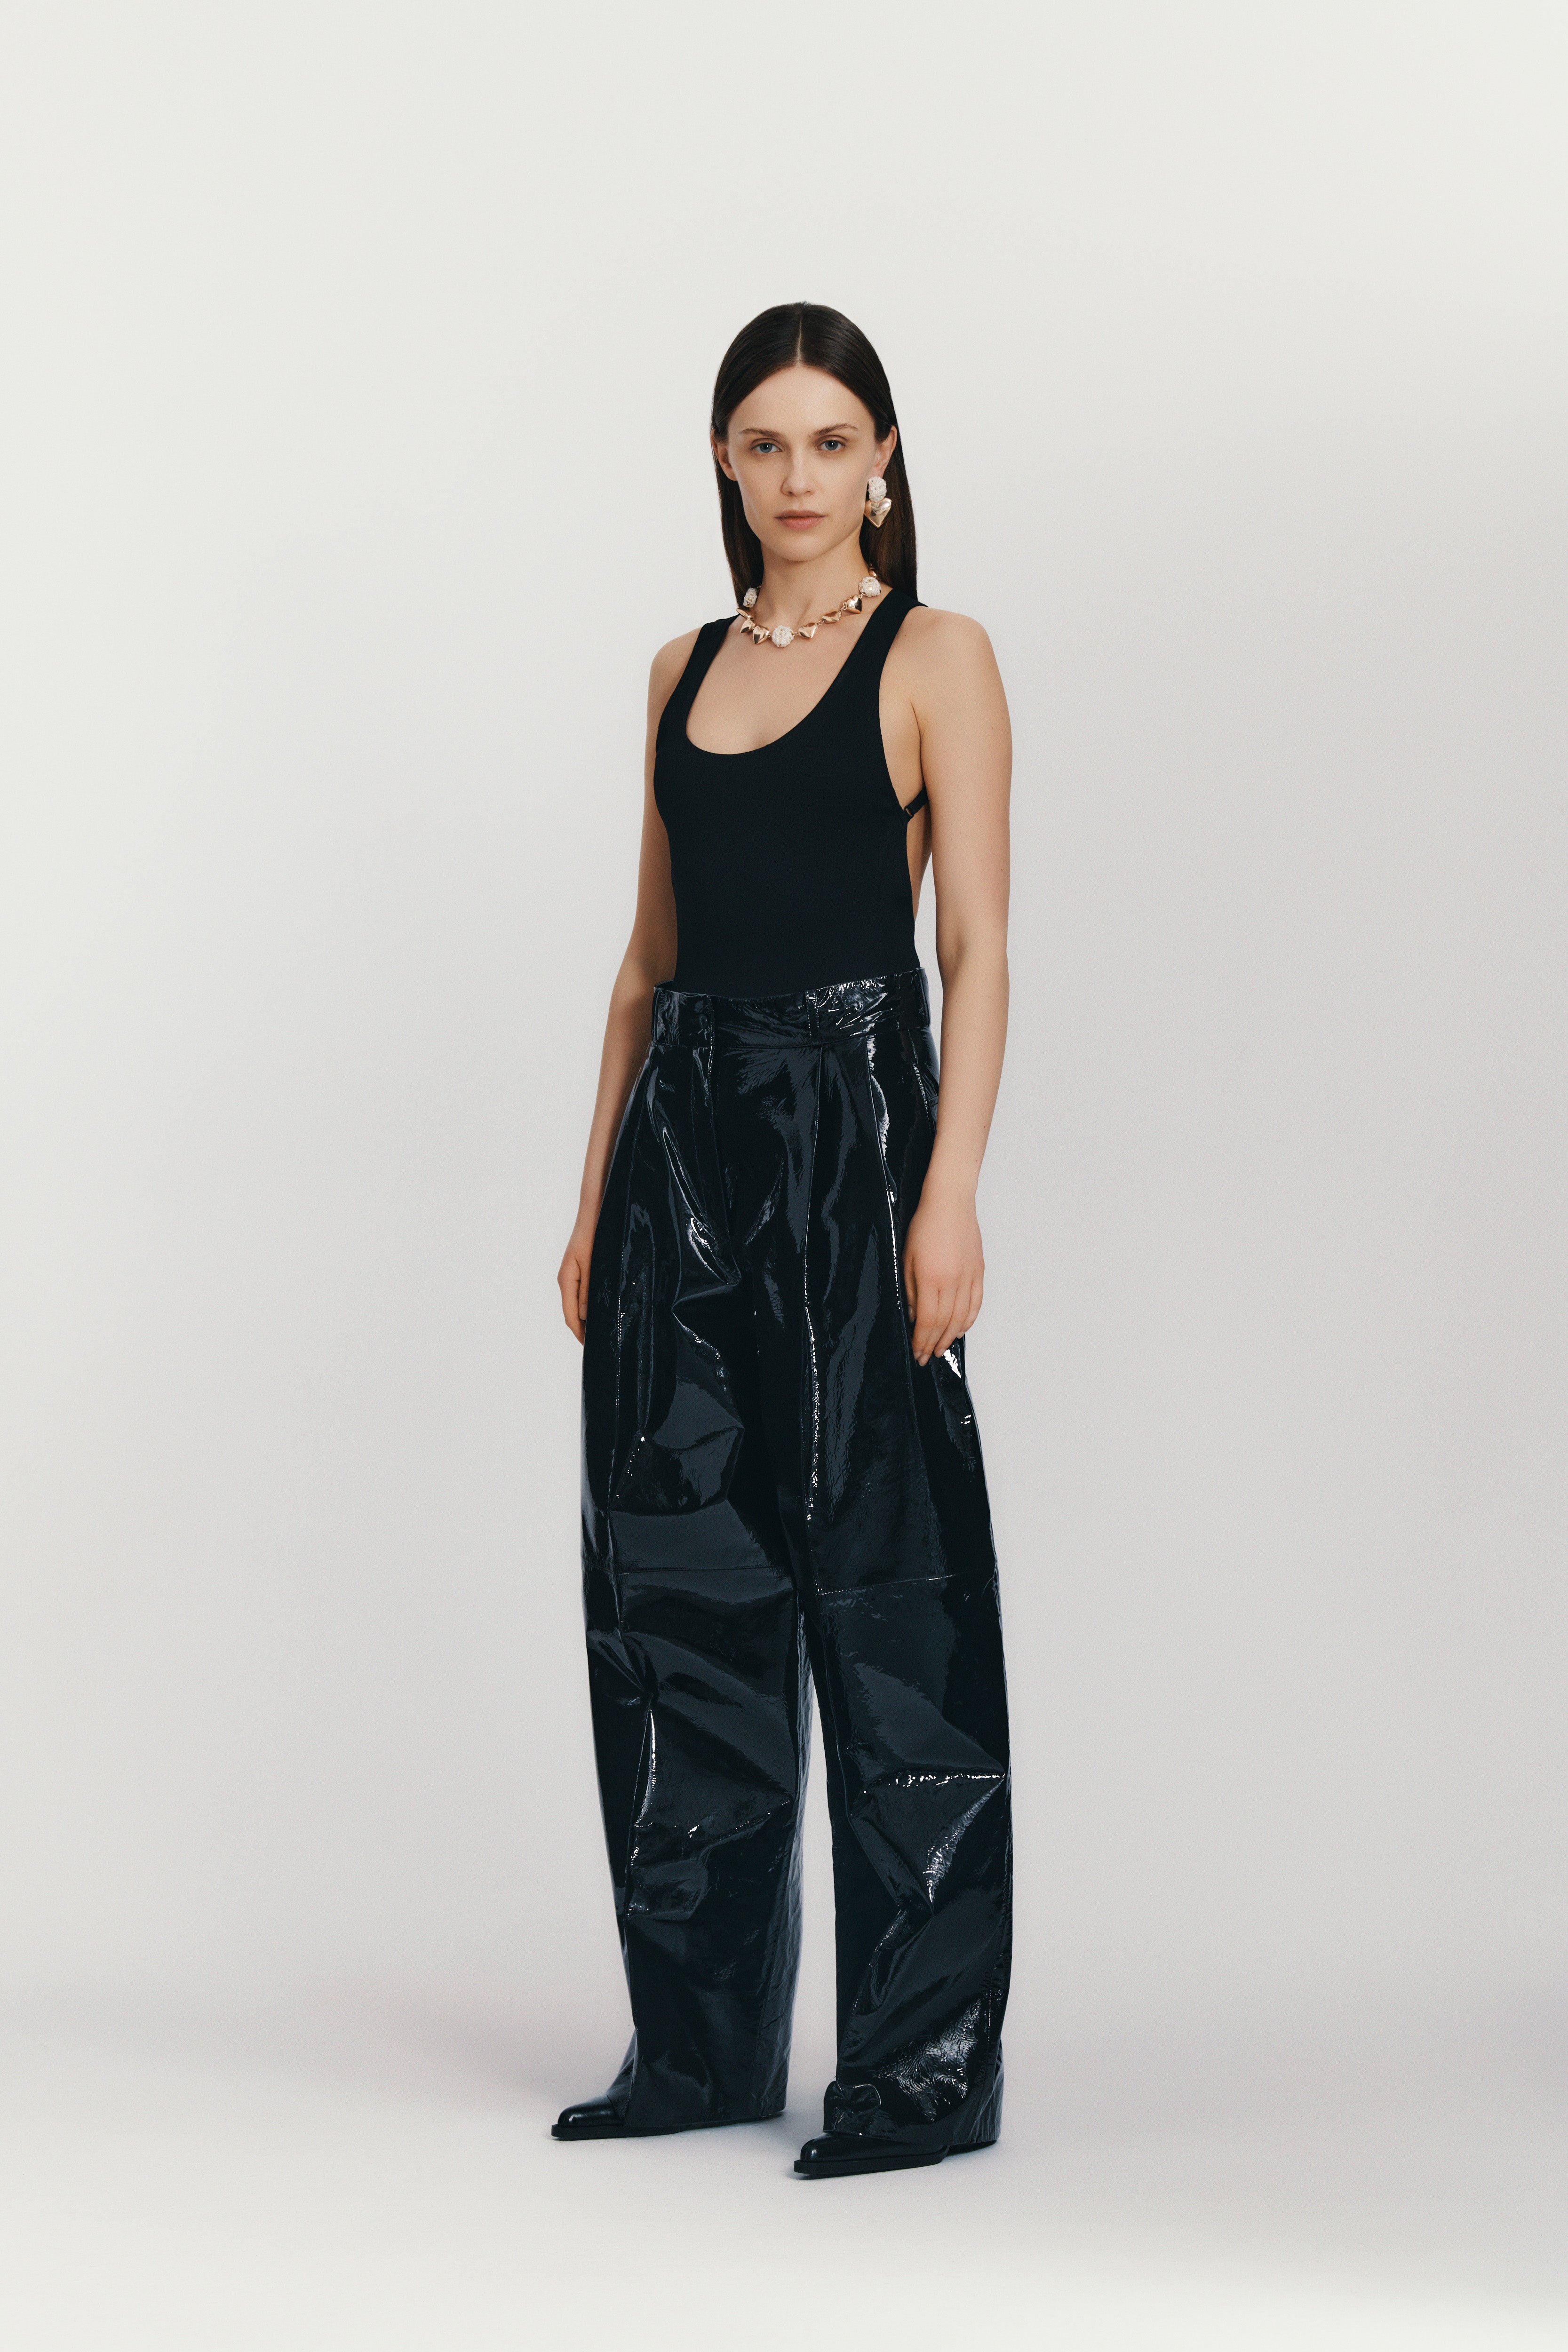 Pistola Cassie Faux Leather Pant | Urban Outfitters